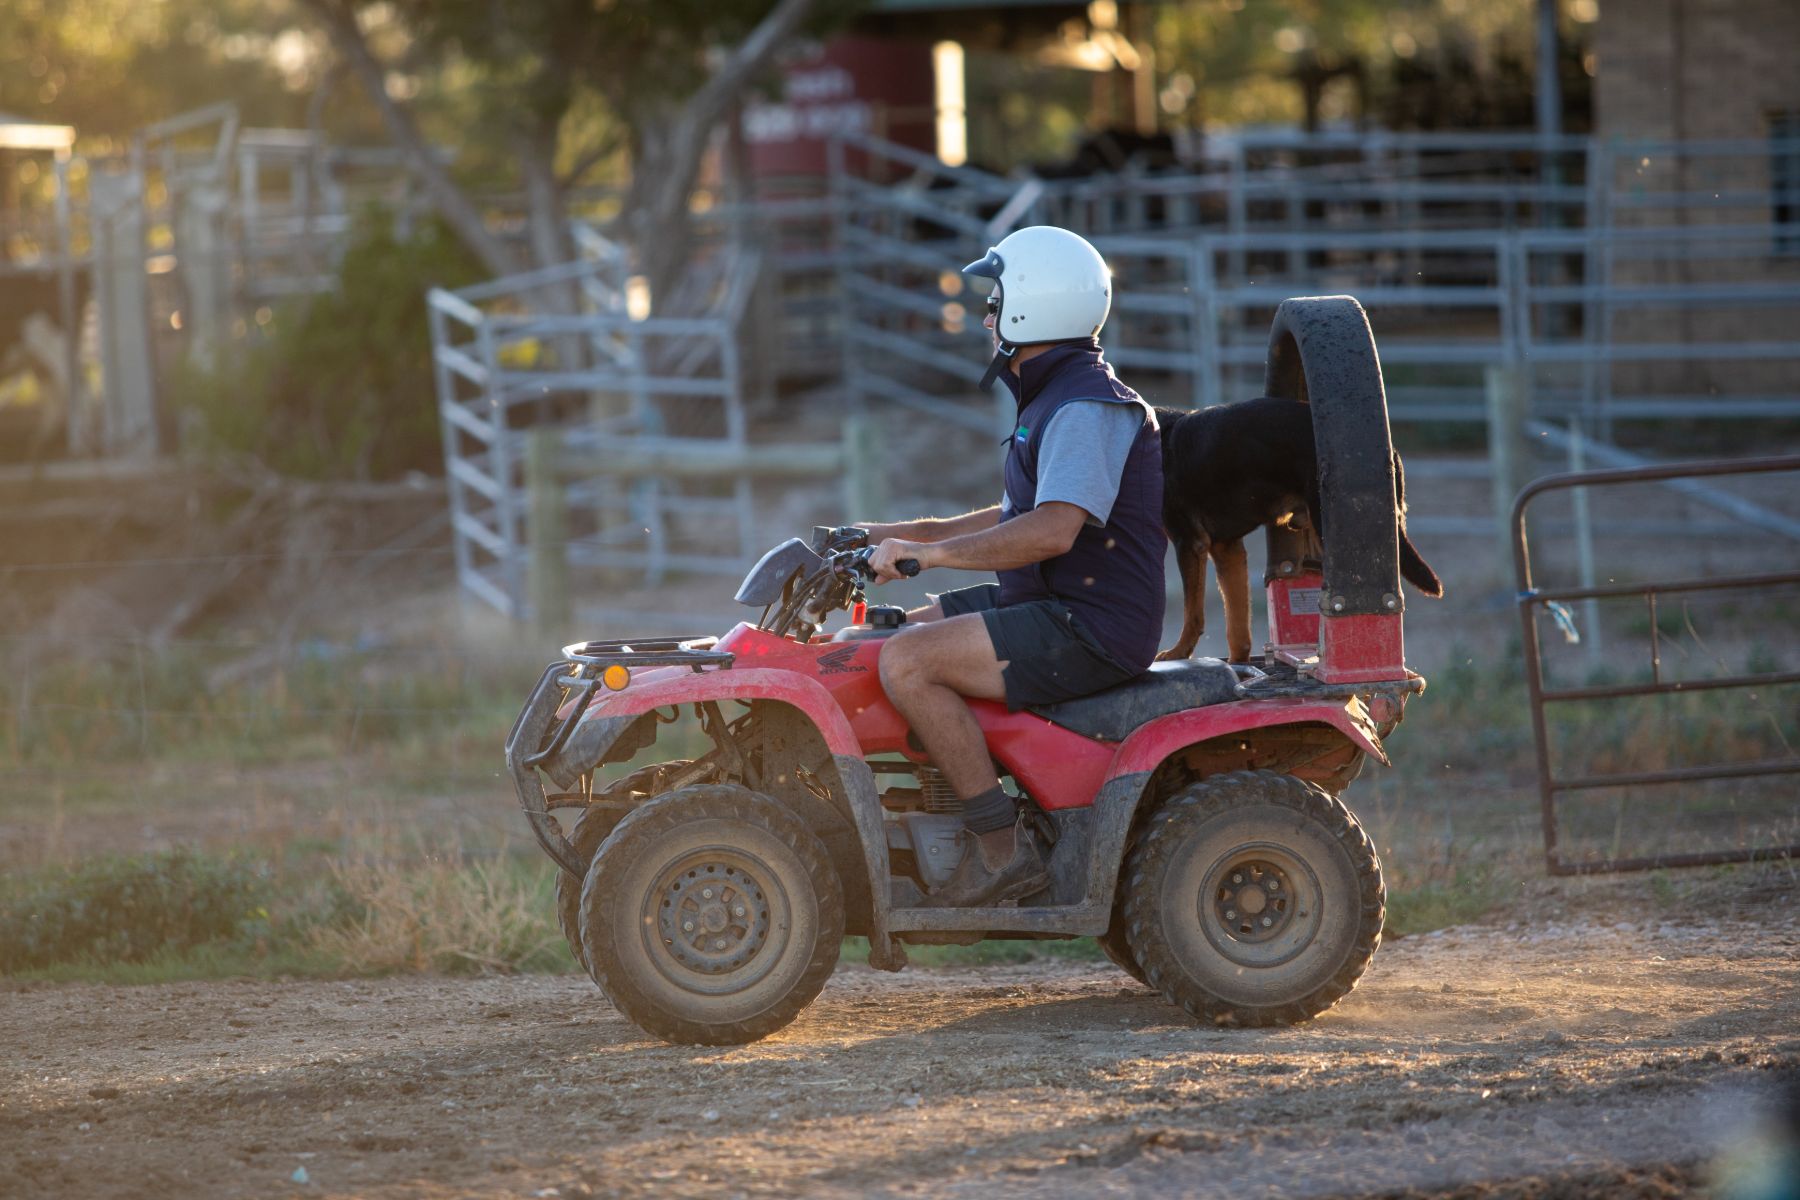 Rider wearing a helmet on a four-wheeler with a roll bar. There is a dog on the back of the four-wheeler and in a stockyard in the background